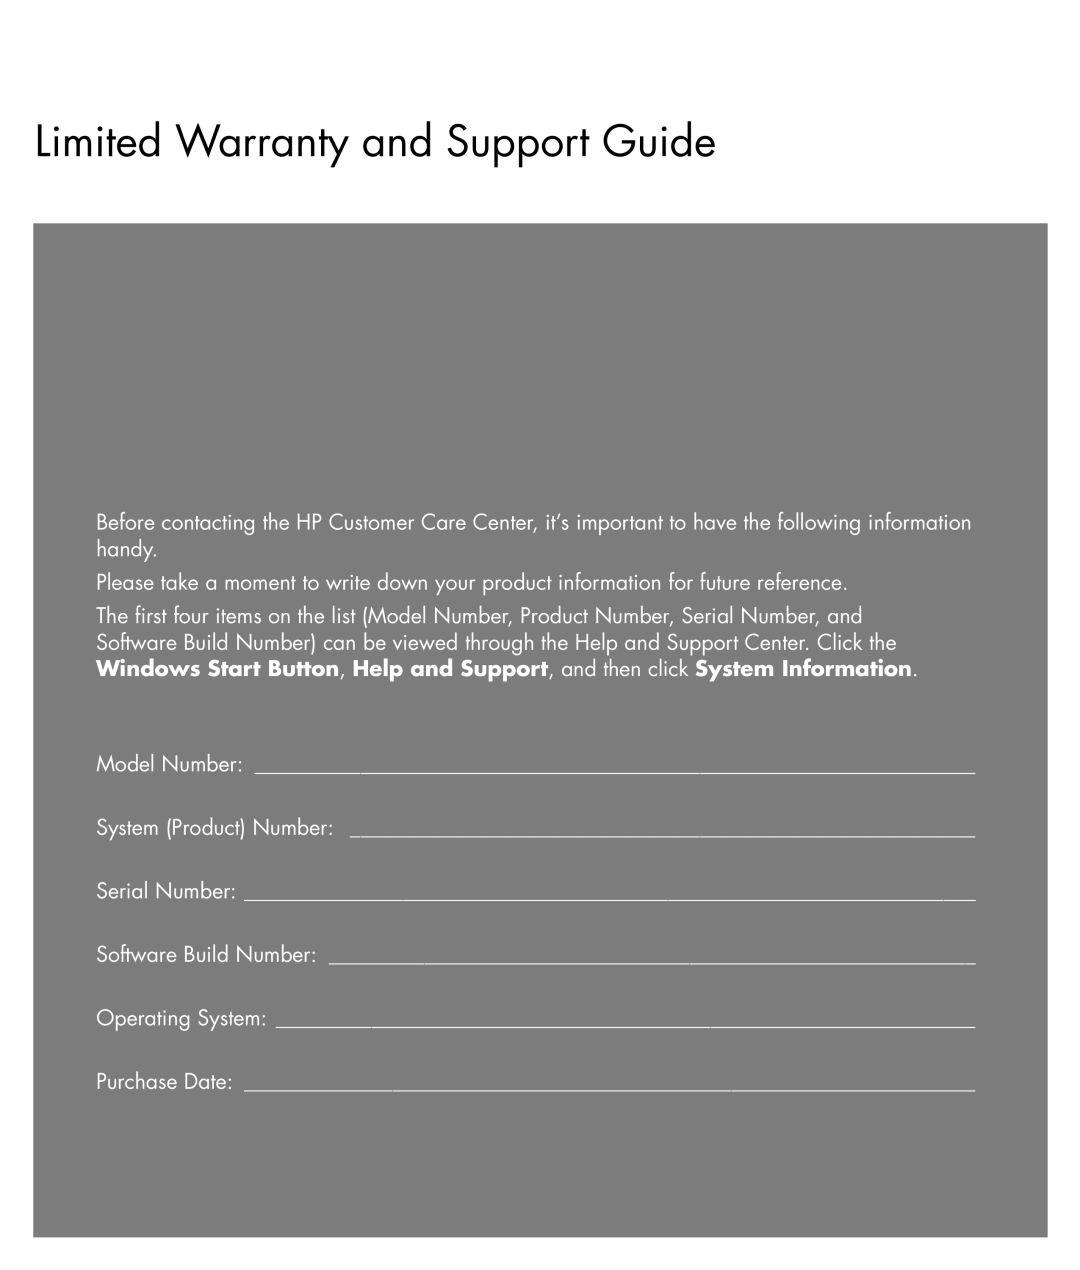 HP SR5448F, SR5450F, SR5433WM, SR5421F, SR5413WM, SR5350F, SR5410F, SR5402FH, SR5333WM manual Limited Warranty and Support Guide 